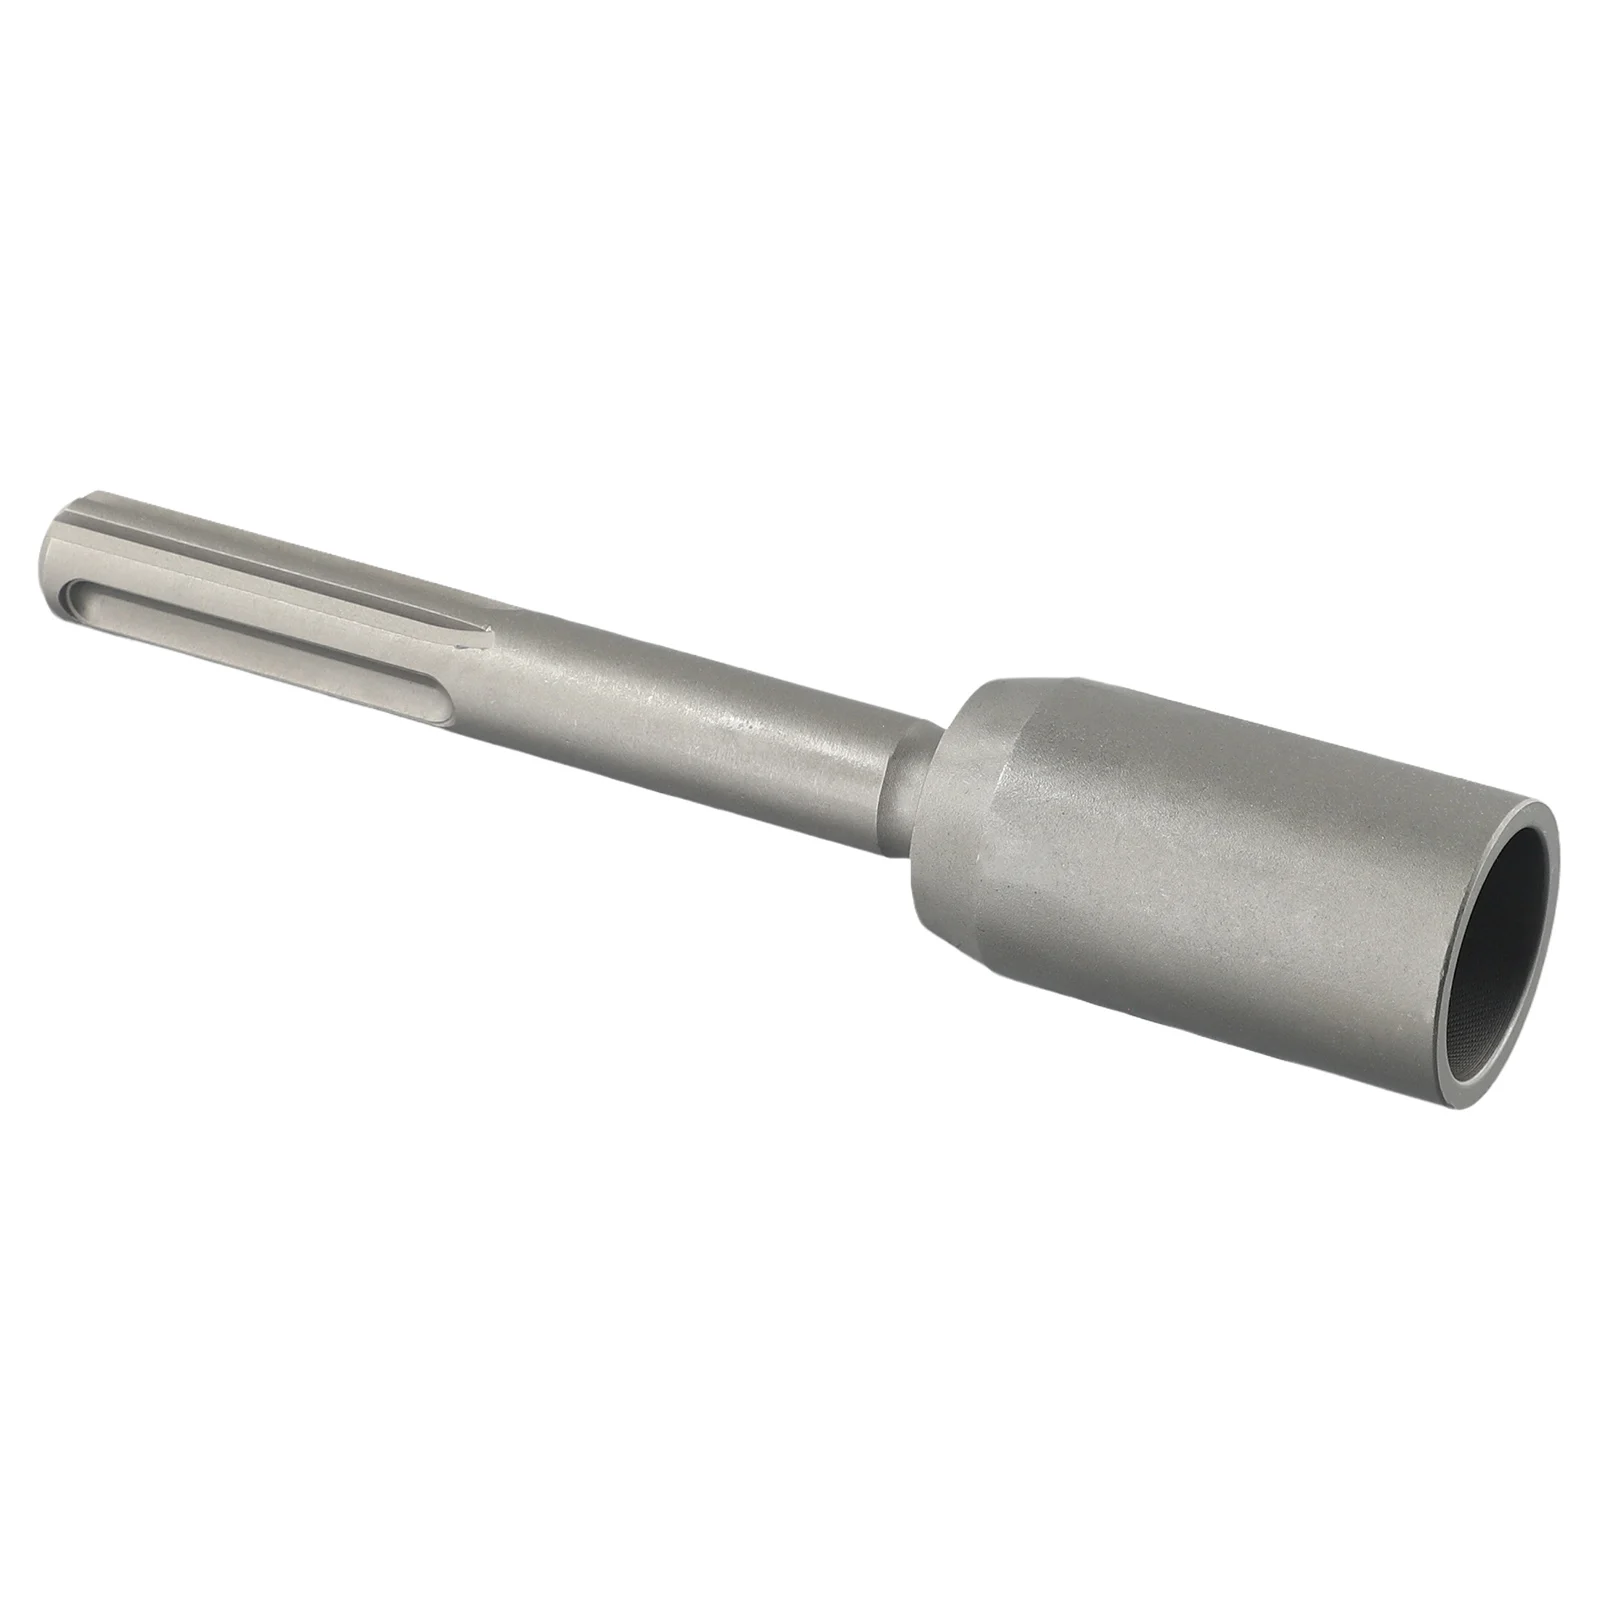 

1PC Alloy Steel Ground Rods For SDS MAX Hammers 30/45/50/65mm Ground Rod Driver Bit For Driving Power Tool Accessories